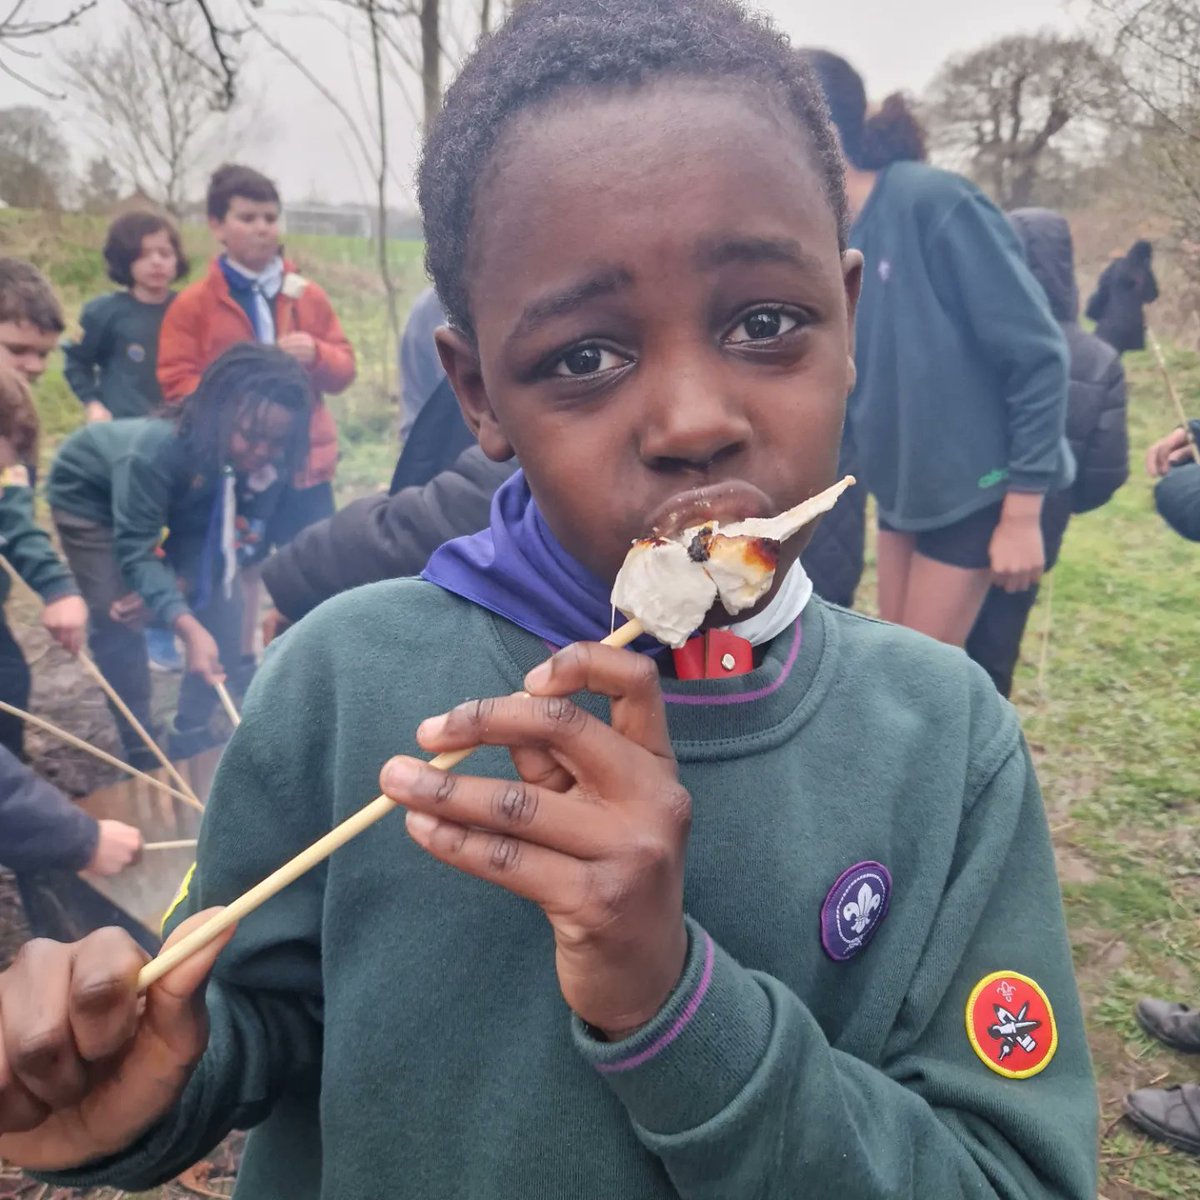 As term draws to close for us, we celebrated with camp fires for the Cubs and Scouts. Marshmallow toasting, some songs and a chance for the scouts to practise with their new cooking equipment! @RAASchoolGatton @surreyscouts @RAAJuniorSchool @RAACoCurriculum @ReigateScouts